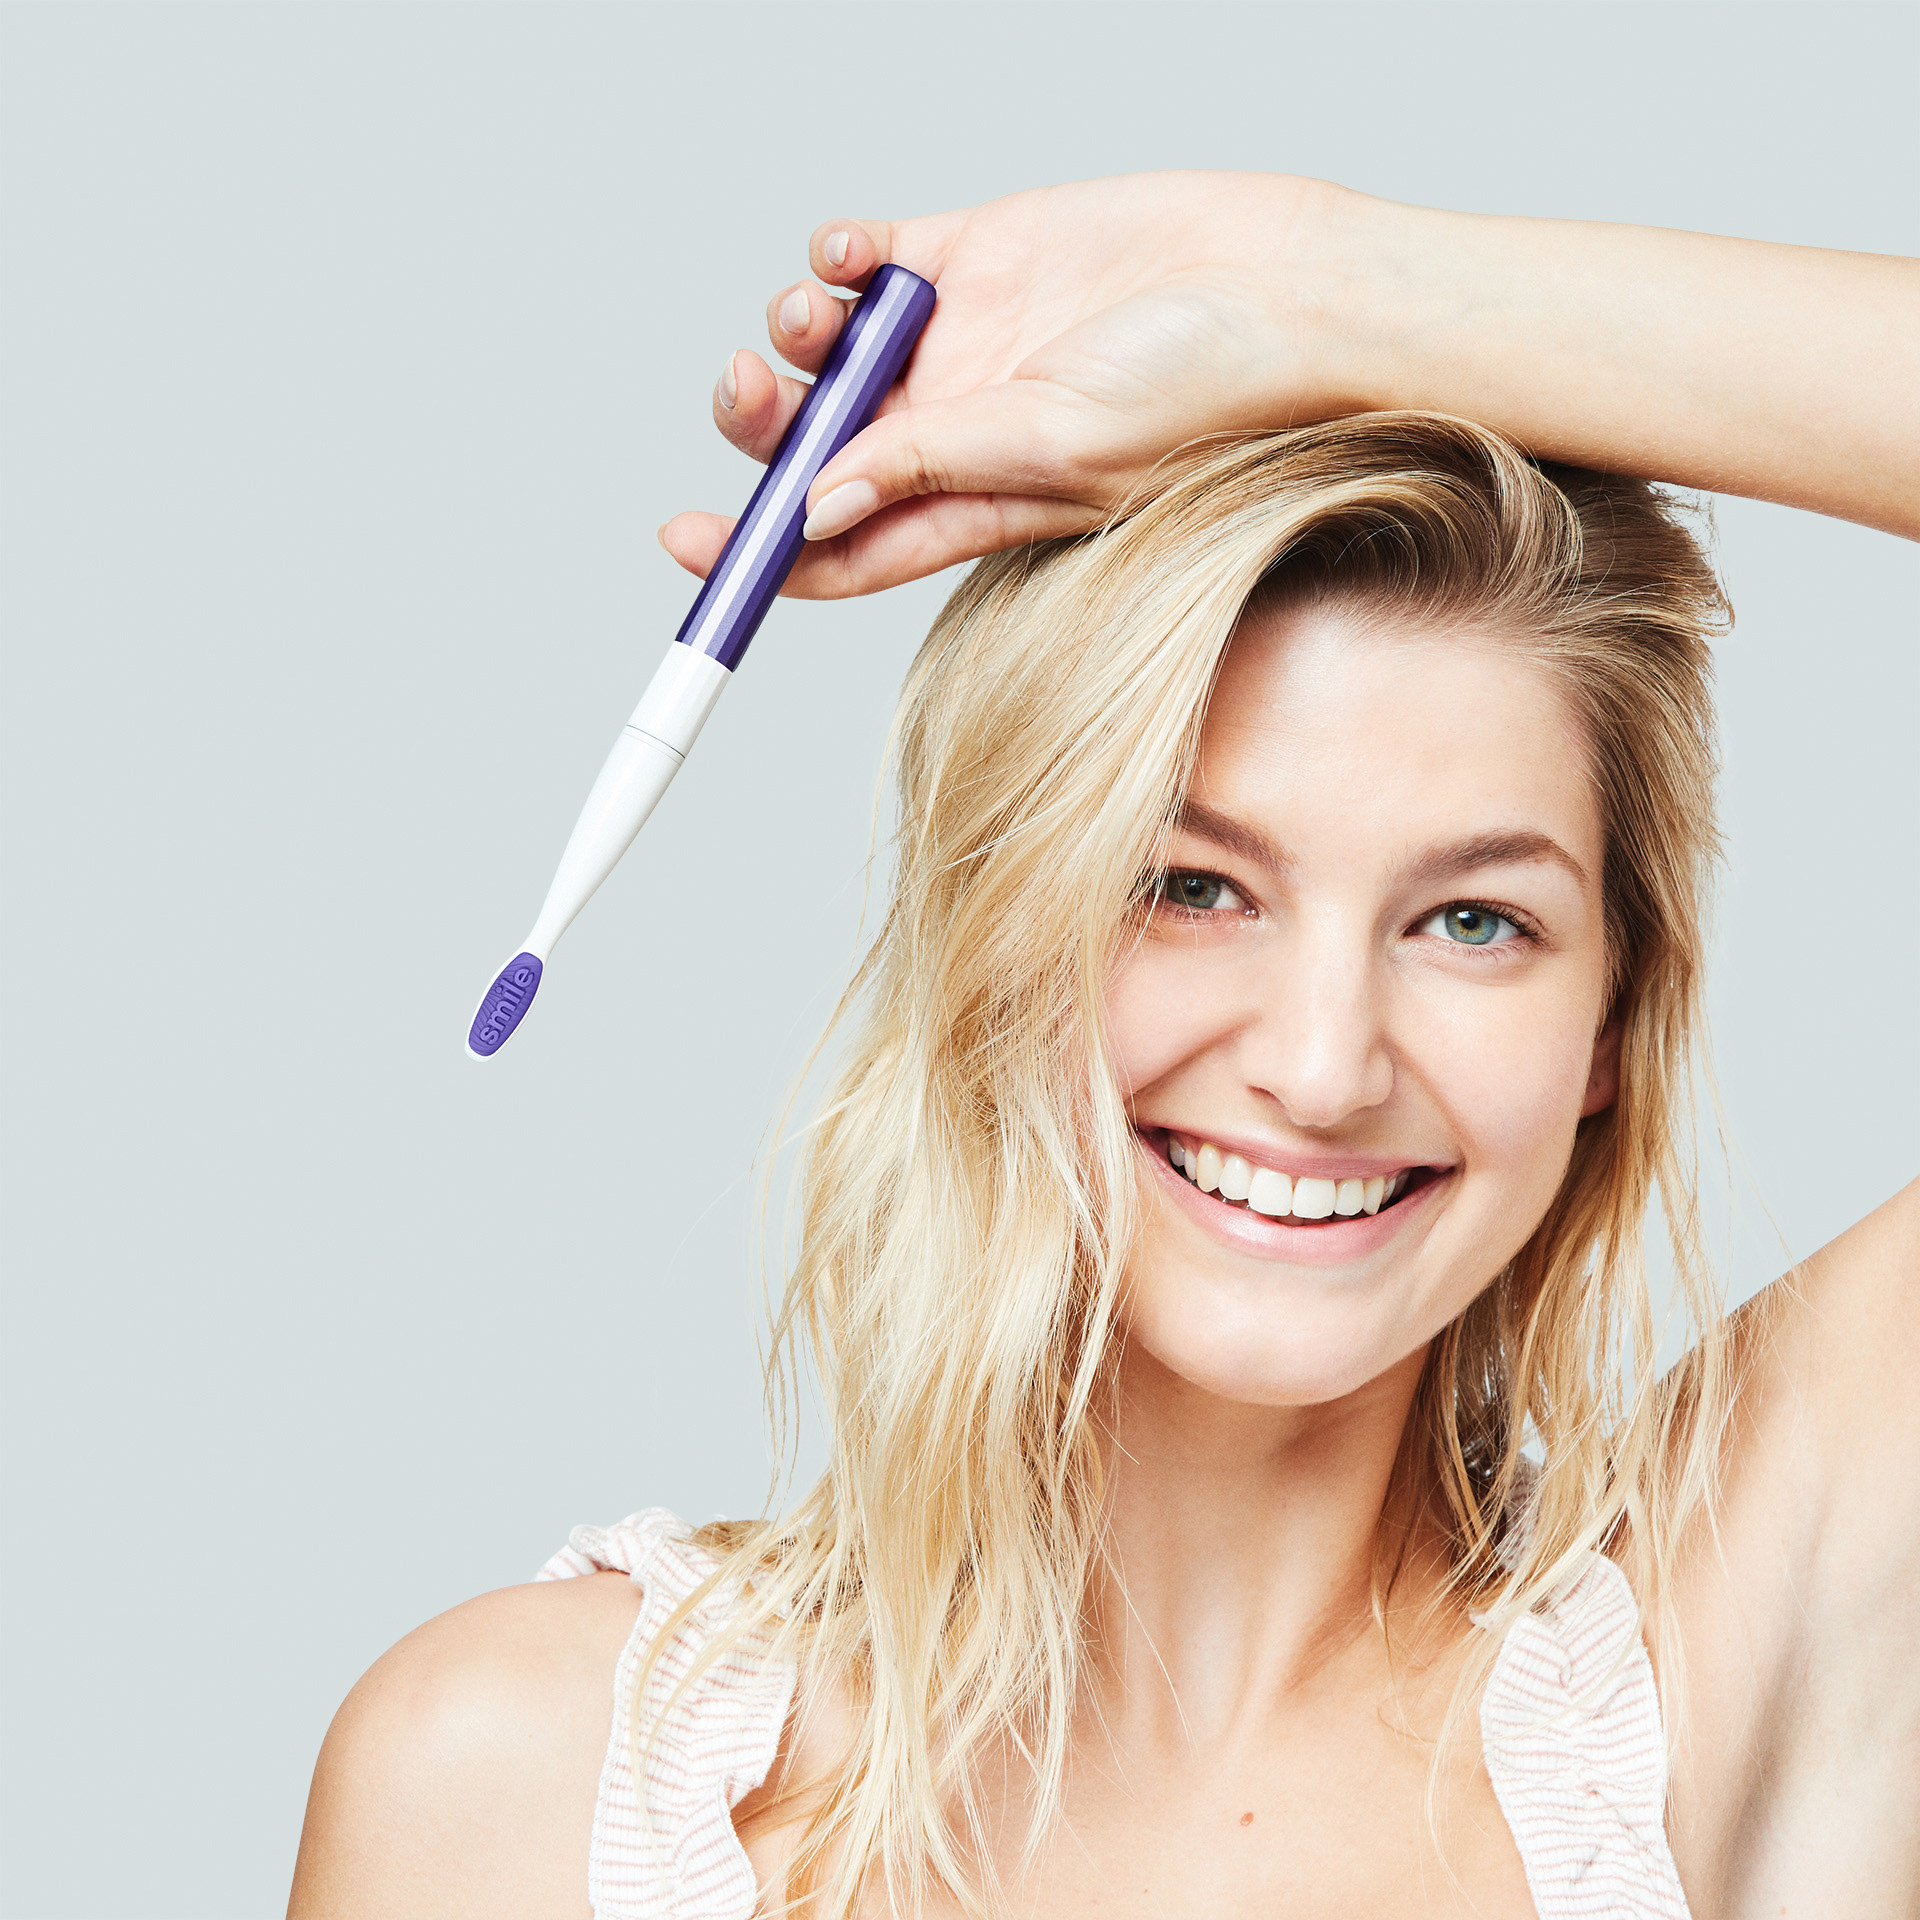 person holding a purple electric toothbrush